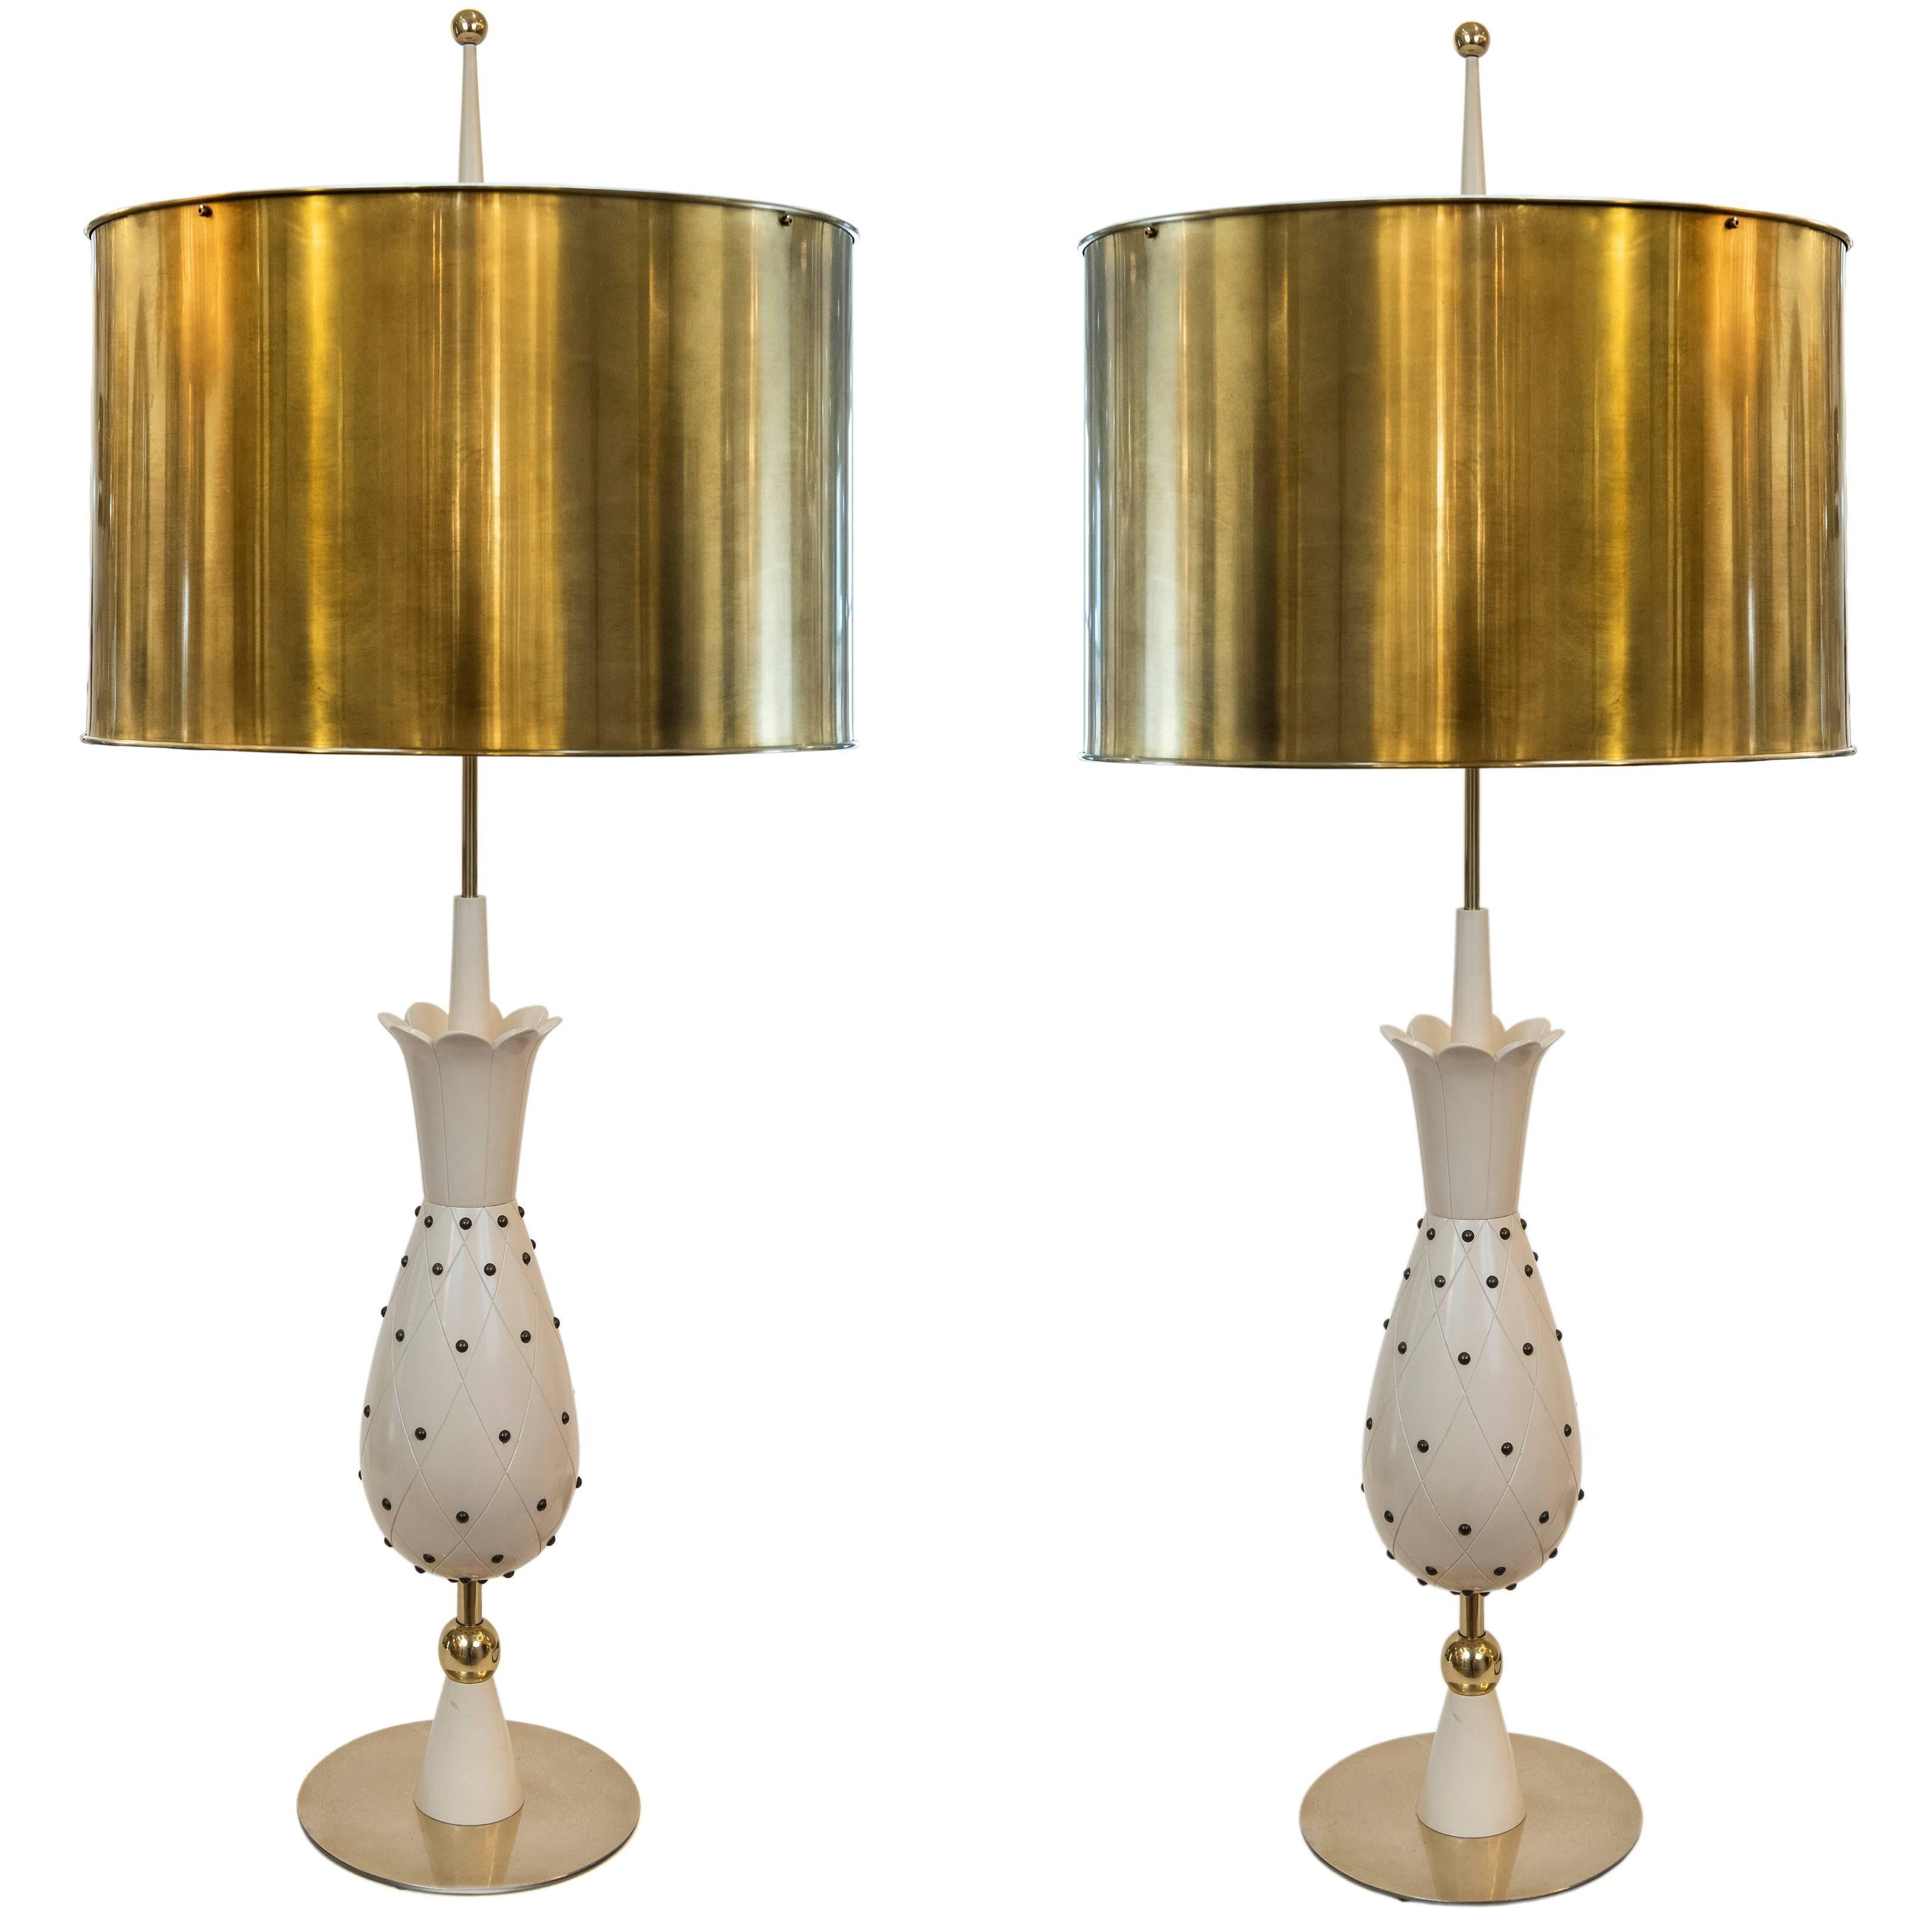 Pair of Hollywood Glam Pinapple Shapped Lamps with Brass Shades, Switzerland